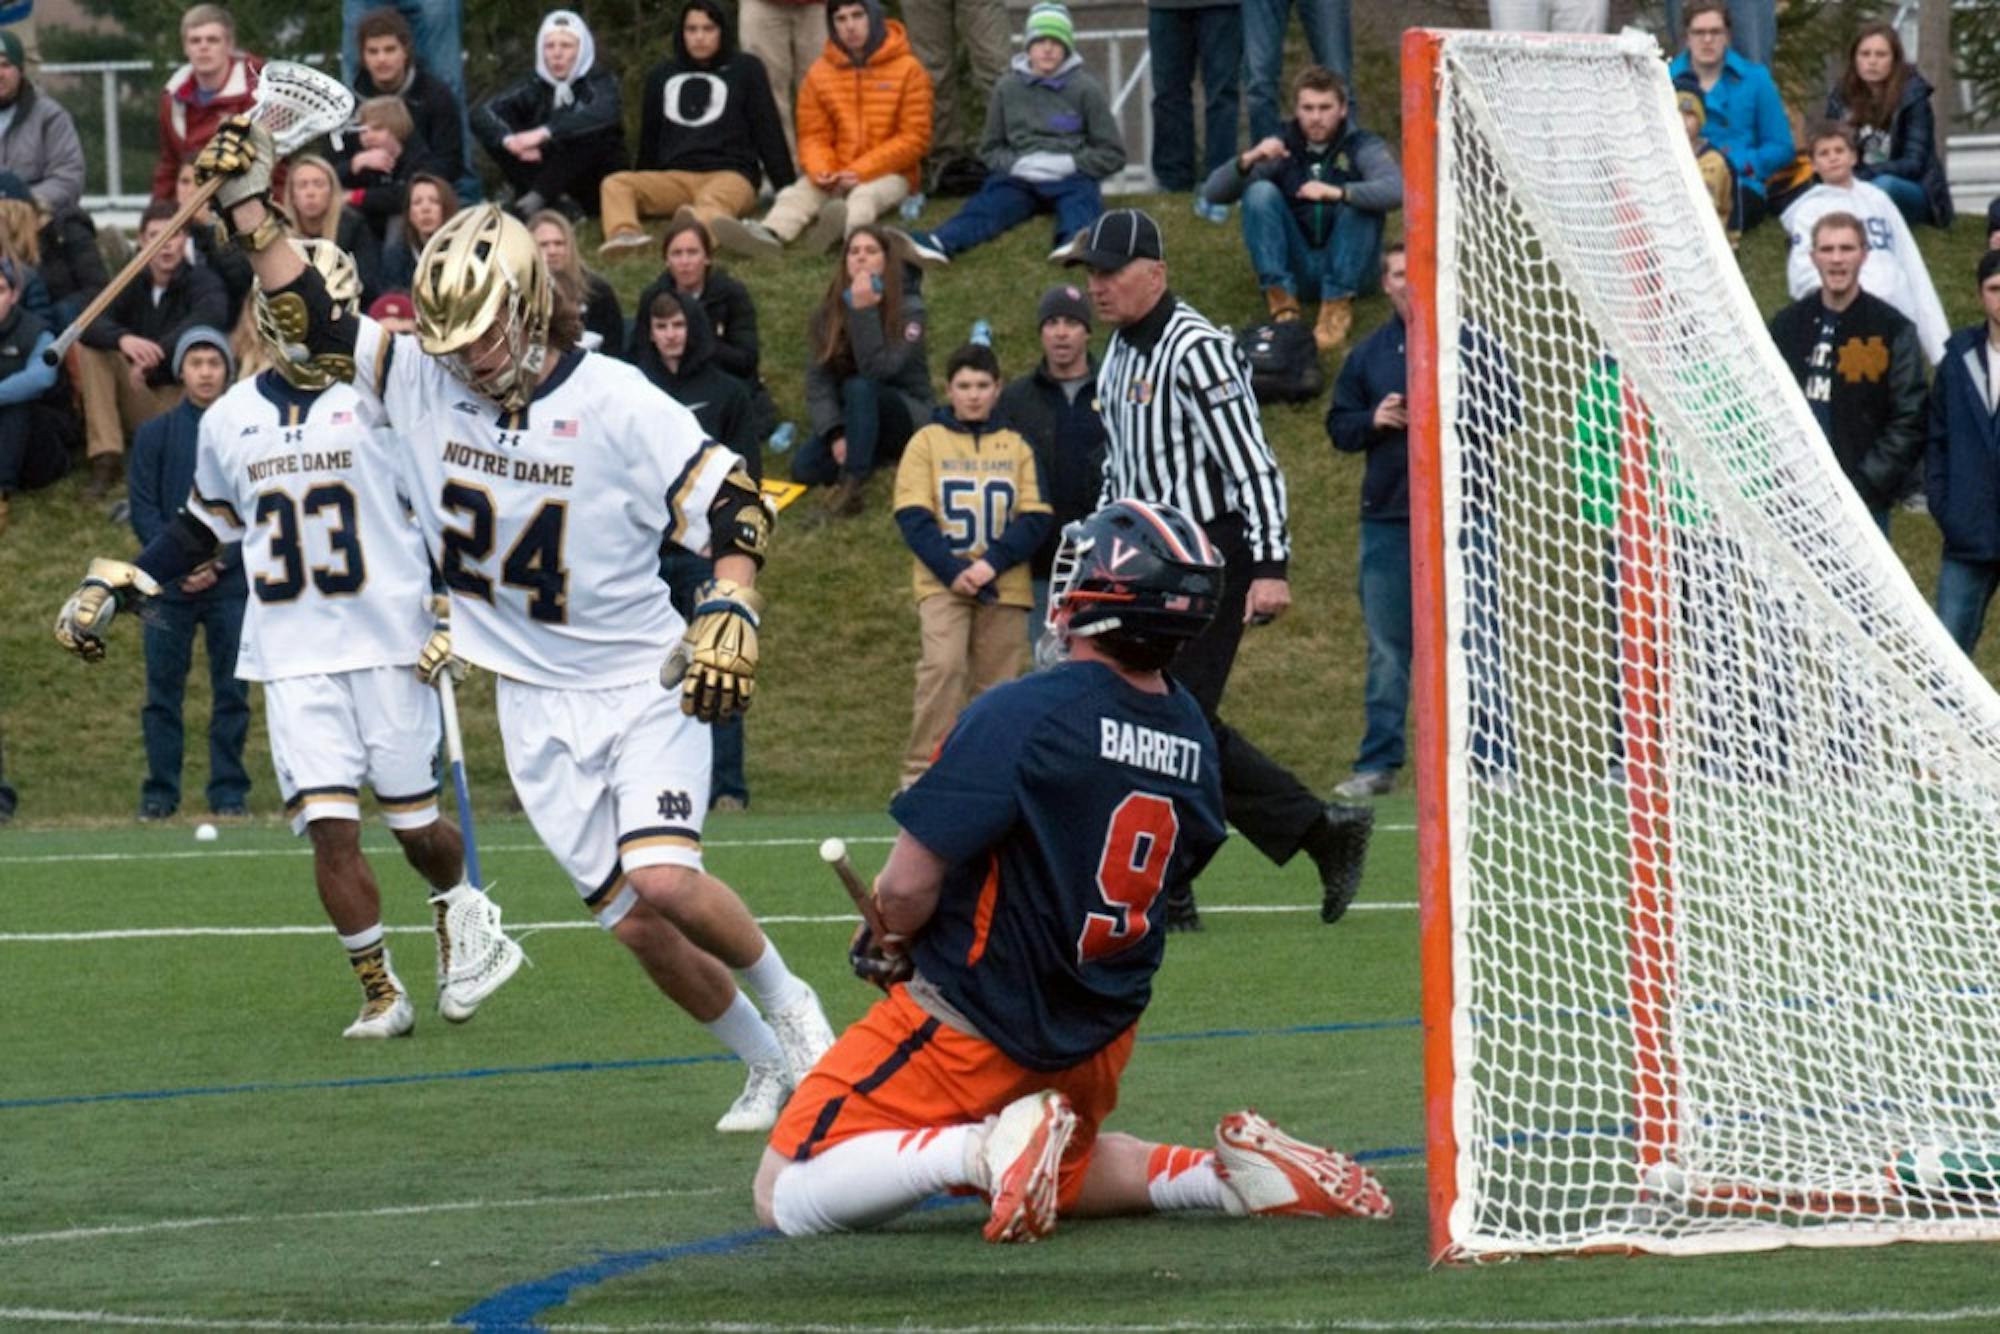 Notre Dame sophomore attack Mikey Wynne celebrates after scoring a goal in ND’s 8-7 overtime win over Virginia on March 19.